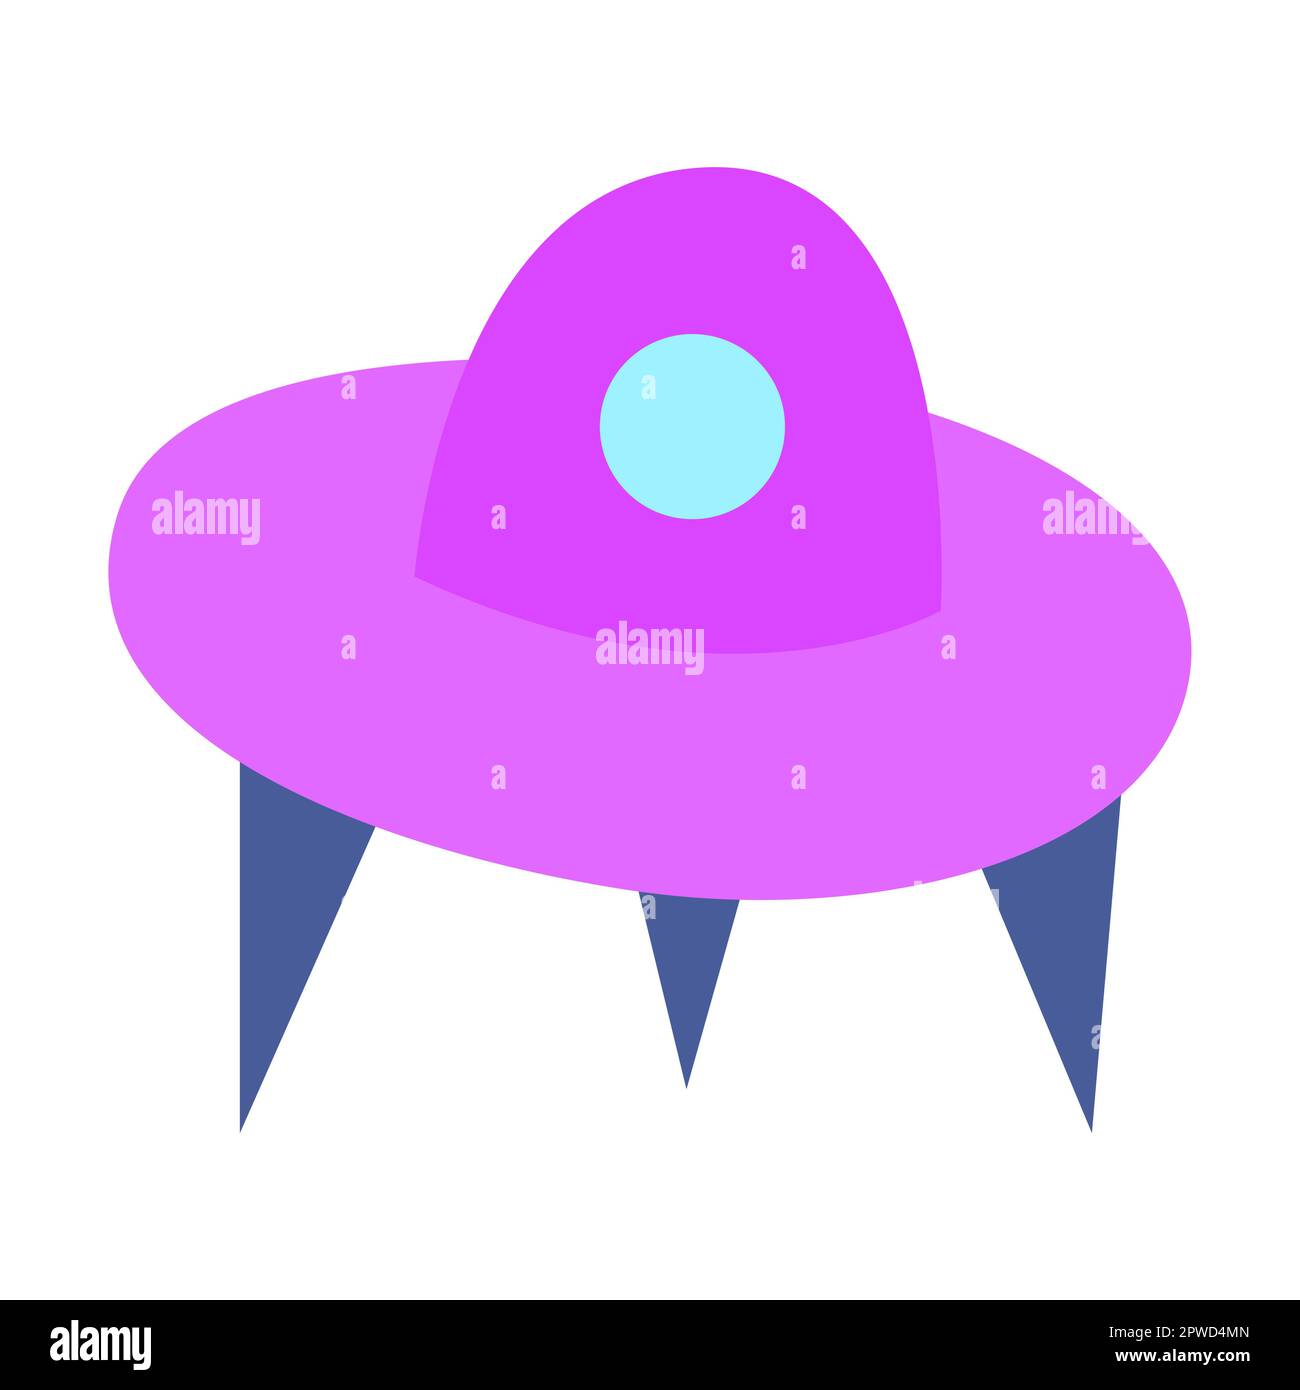 Flying saucer, alien ship of aliens from a distant galaxy. Flat cartoon illustration isolated on white background Stock Vector